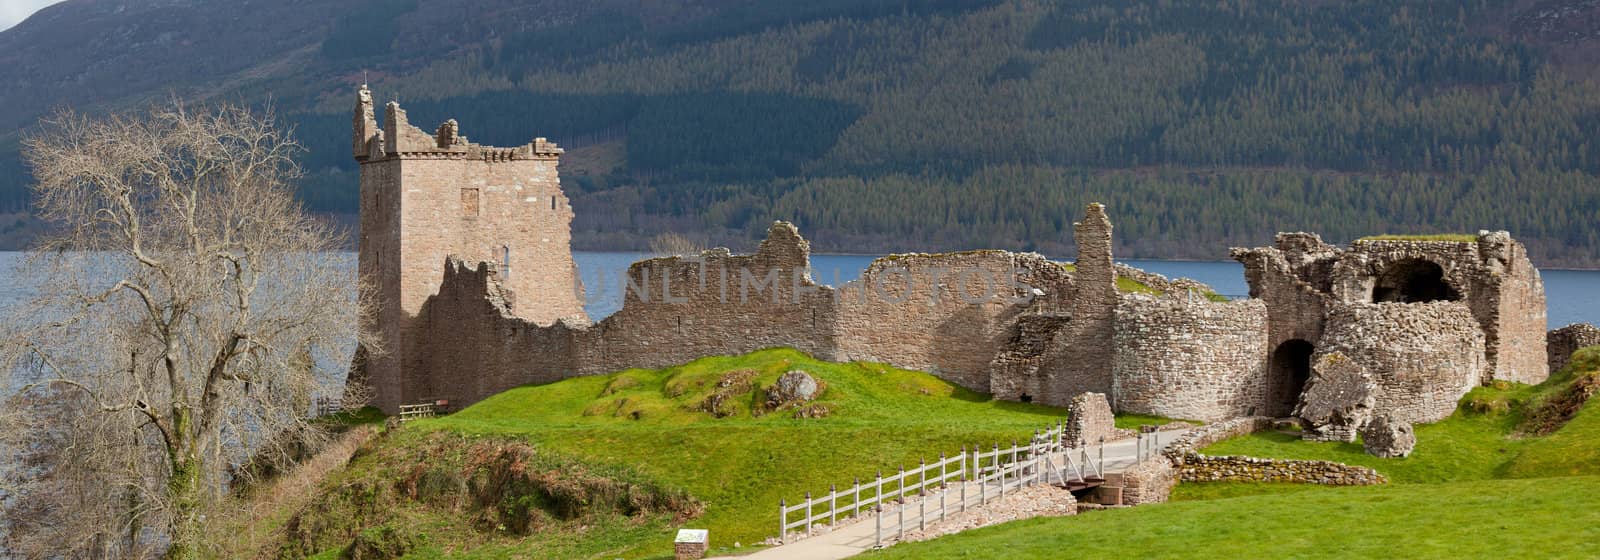 Urquhart Castle Panorama by vichie81